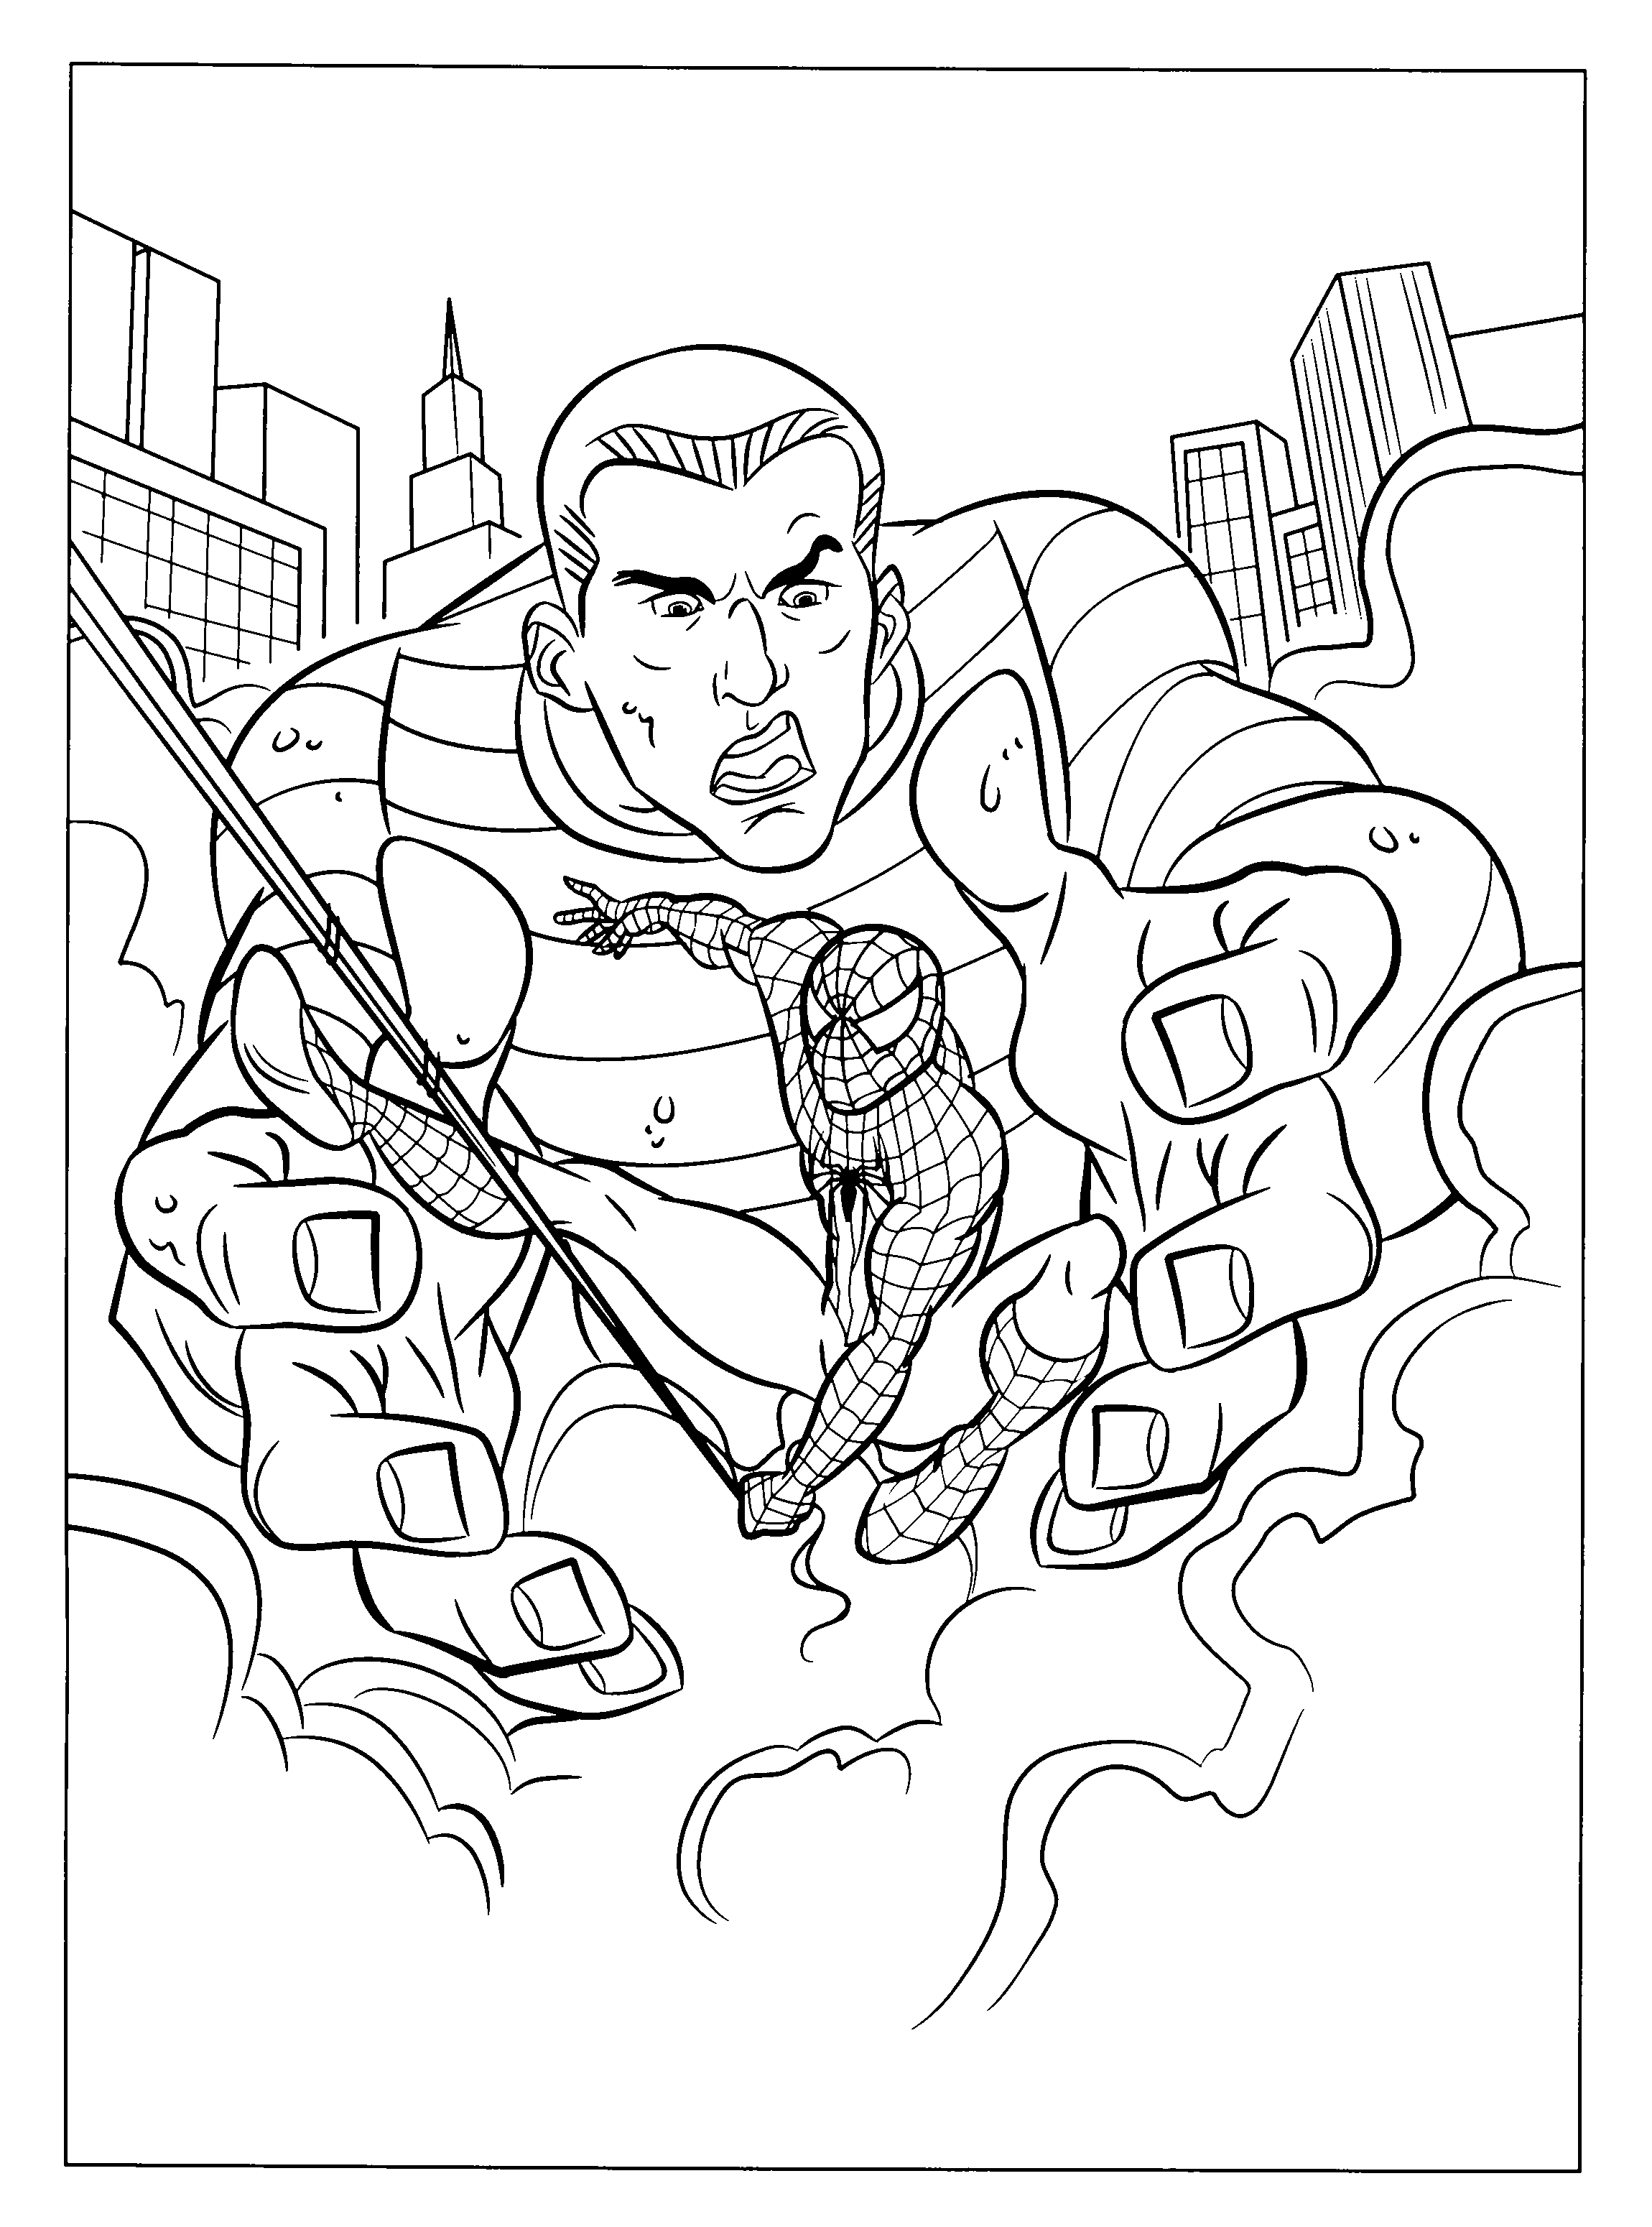 Spiderman Coloring pages | Kids coloring pages | Free coloring pages | #26